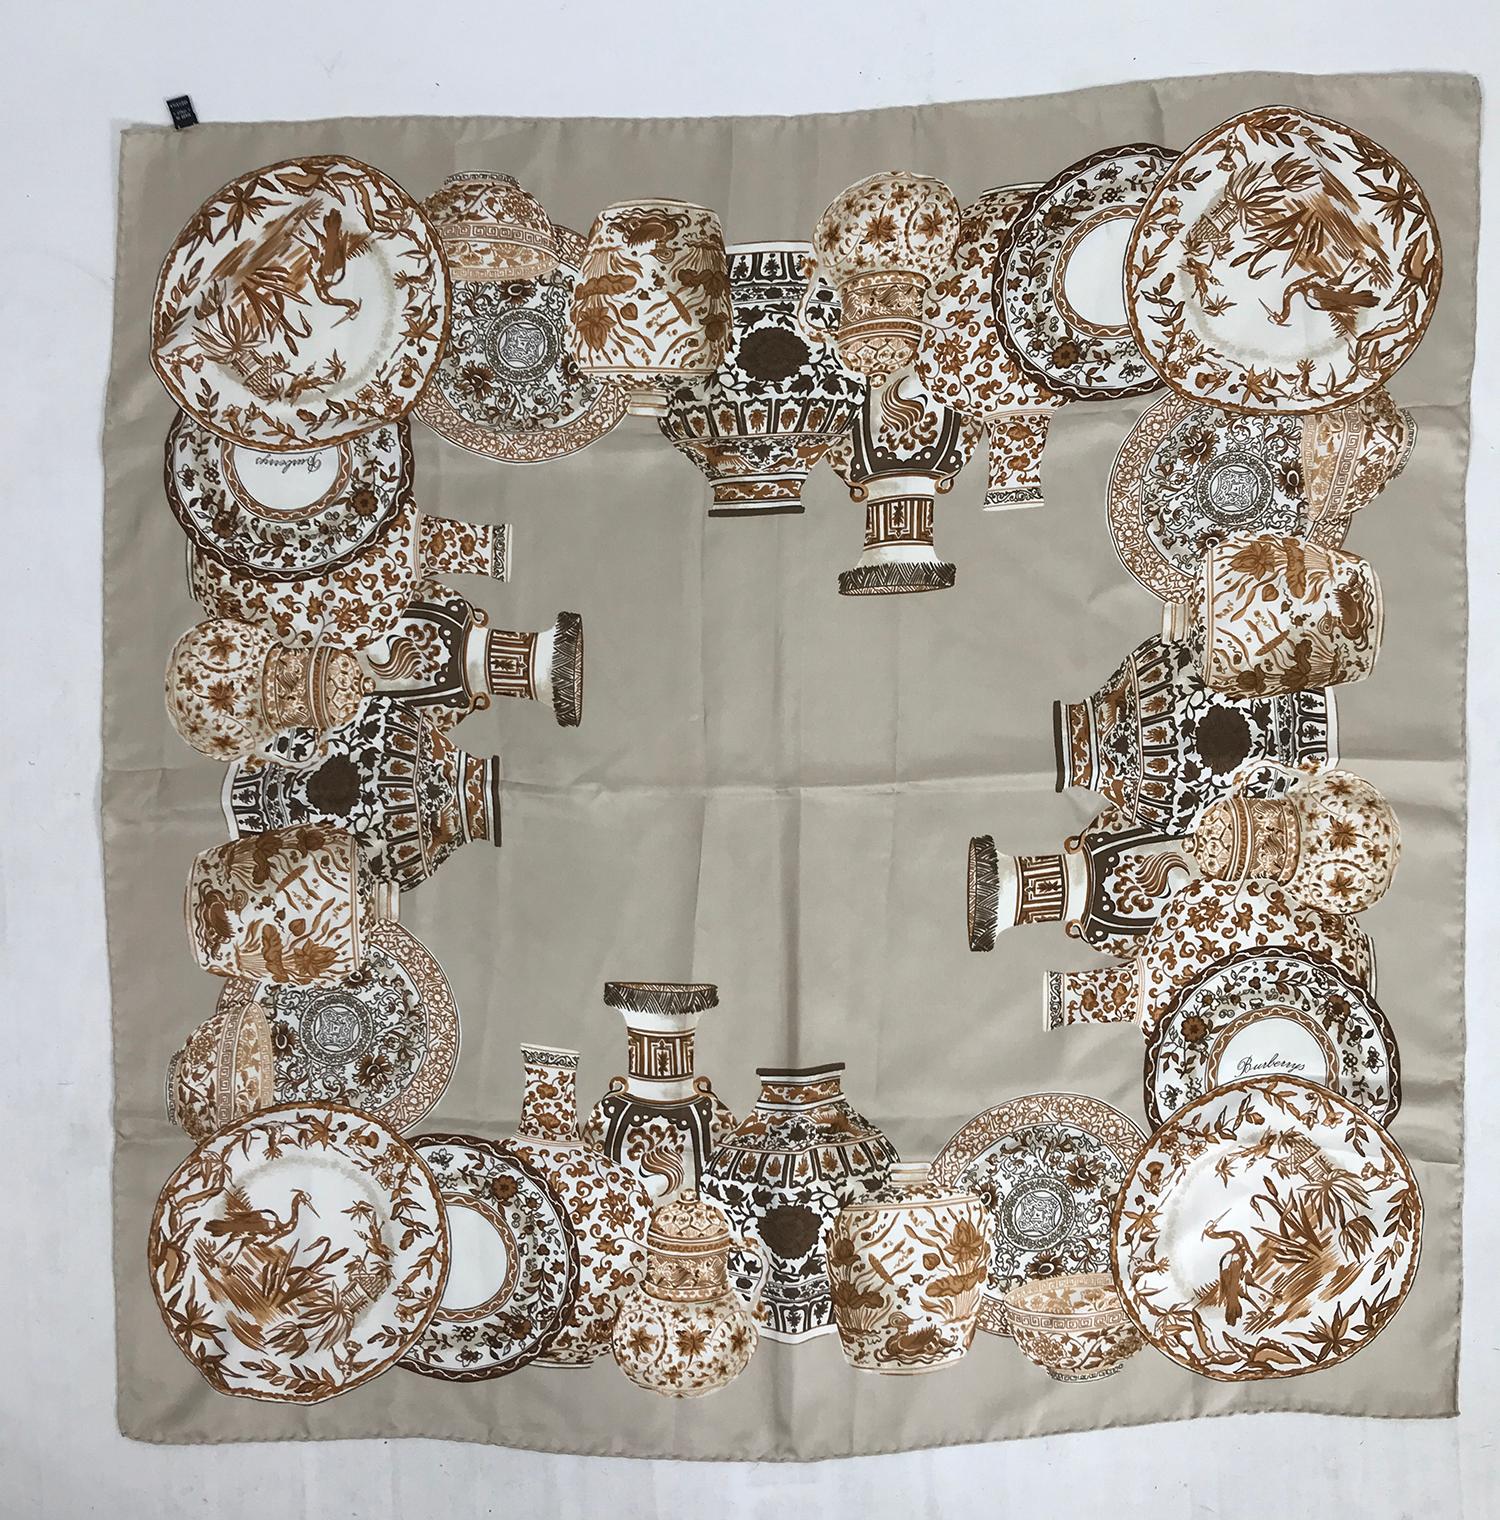 Gray Burberry Silk Scarf Transfer-ware China Pattern in Browns and Tan For Sale